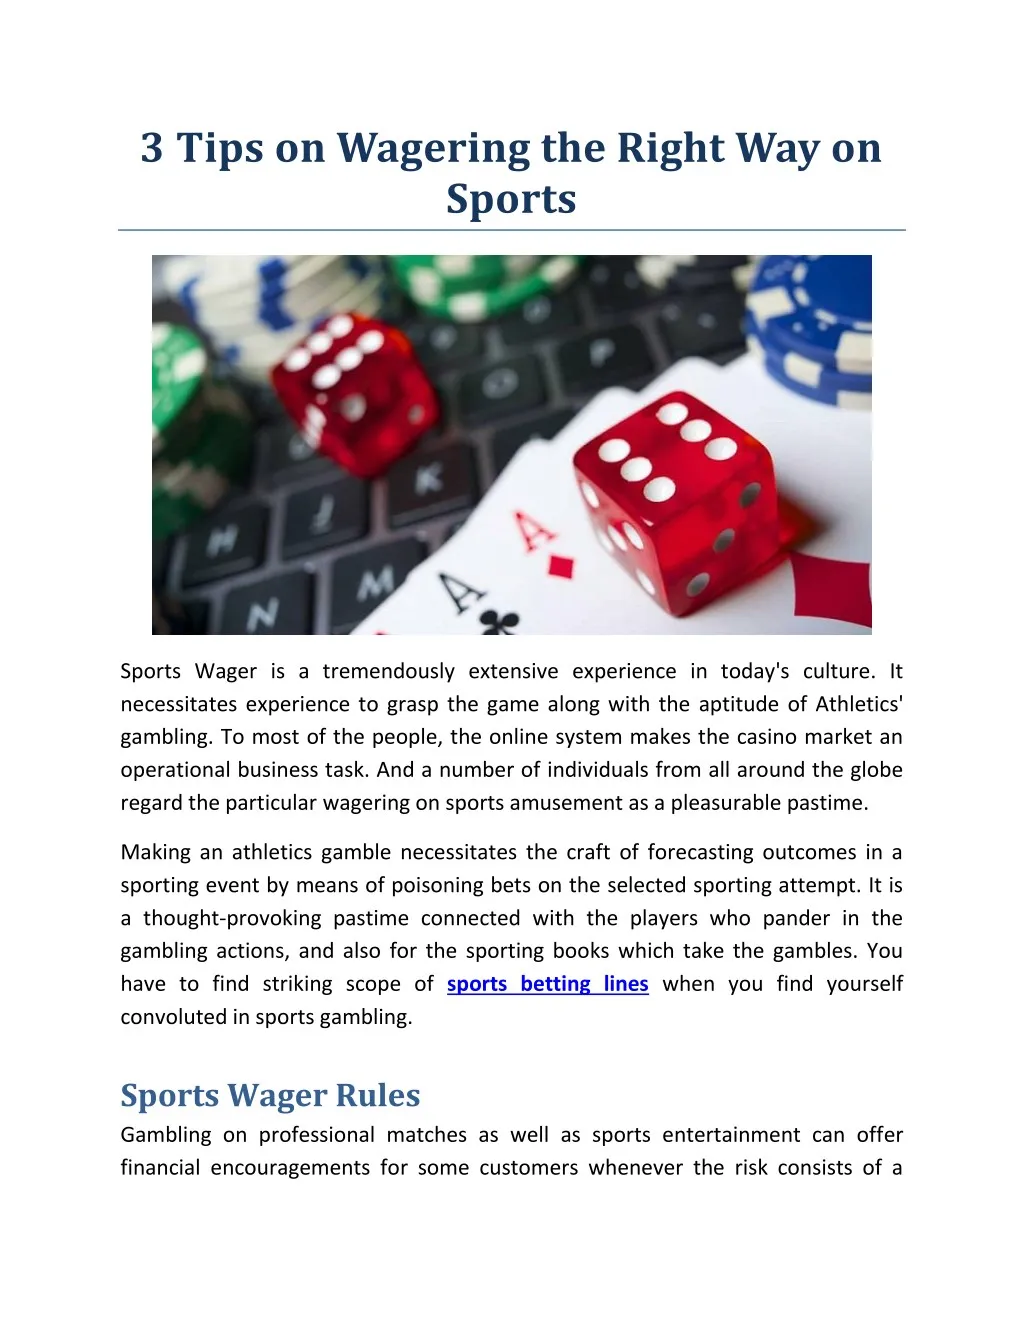 3 tips on wagering the right way on sports